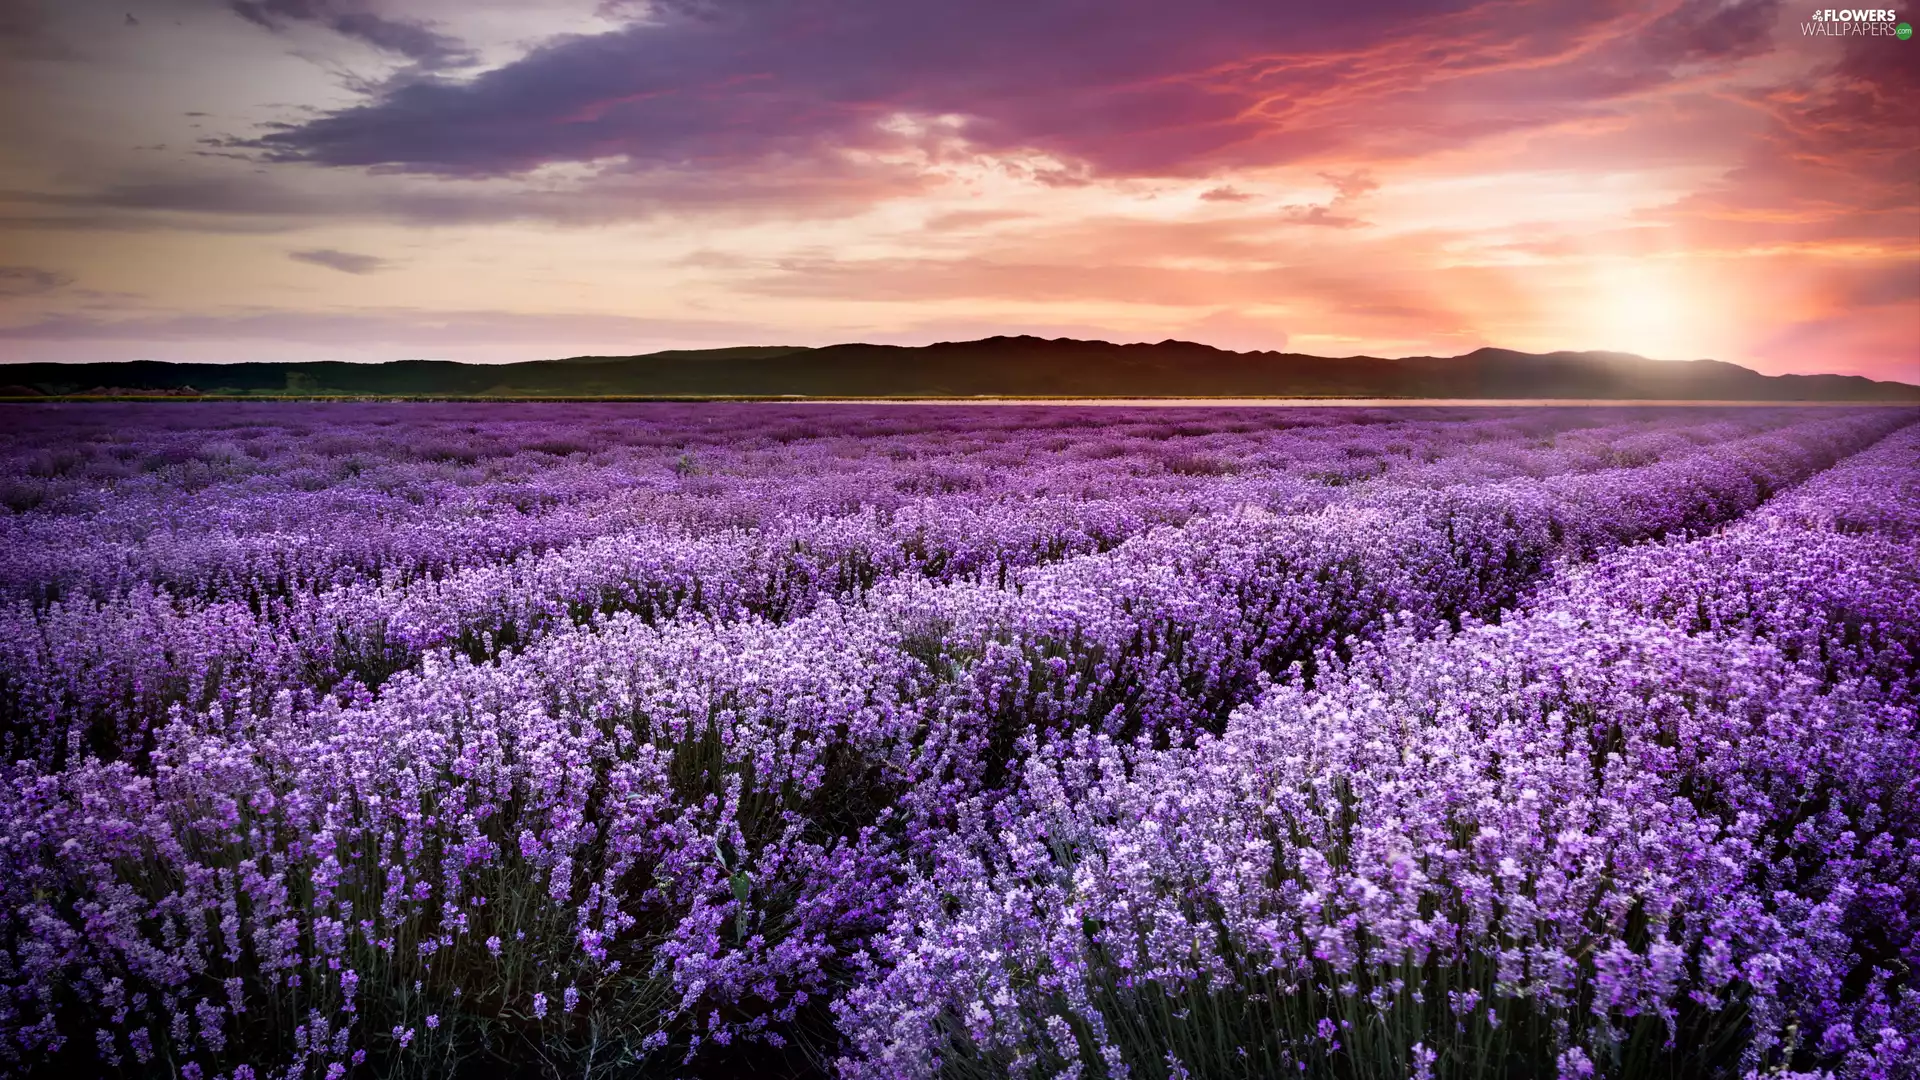 lavender, Great Sunsets, Field